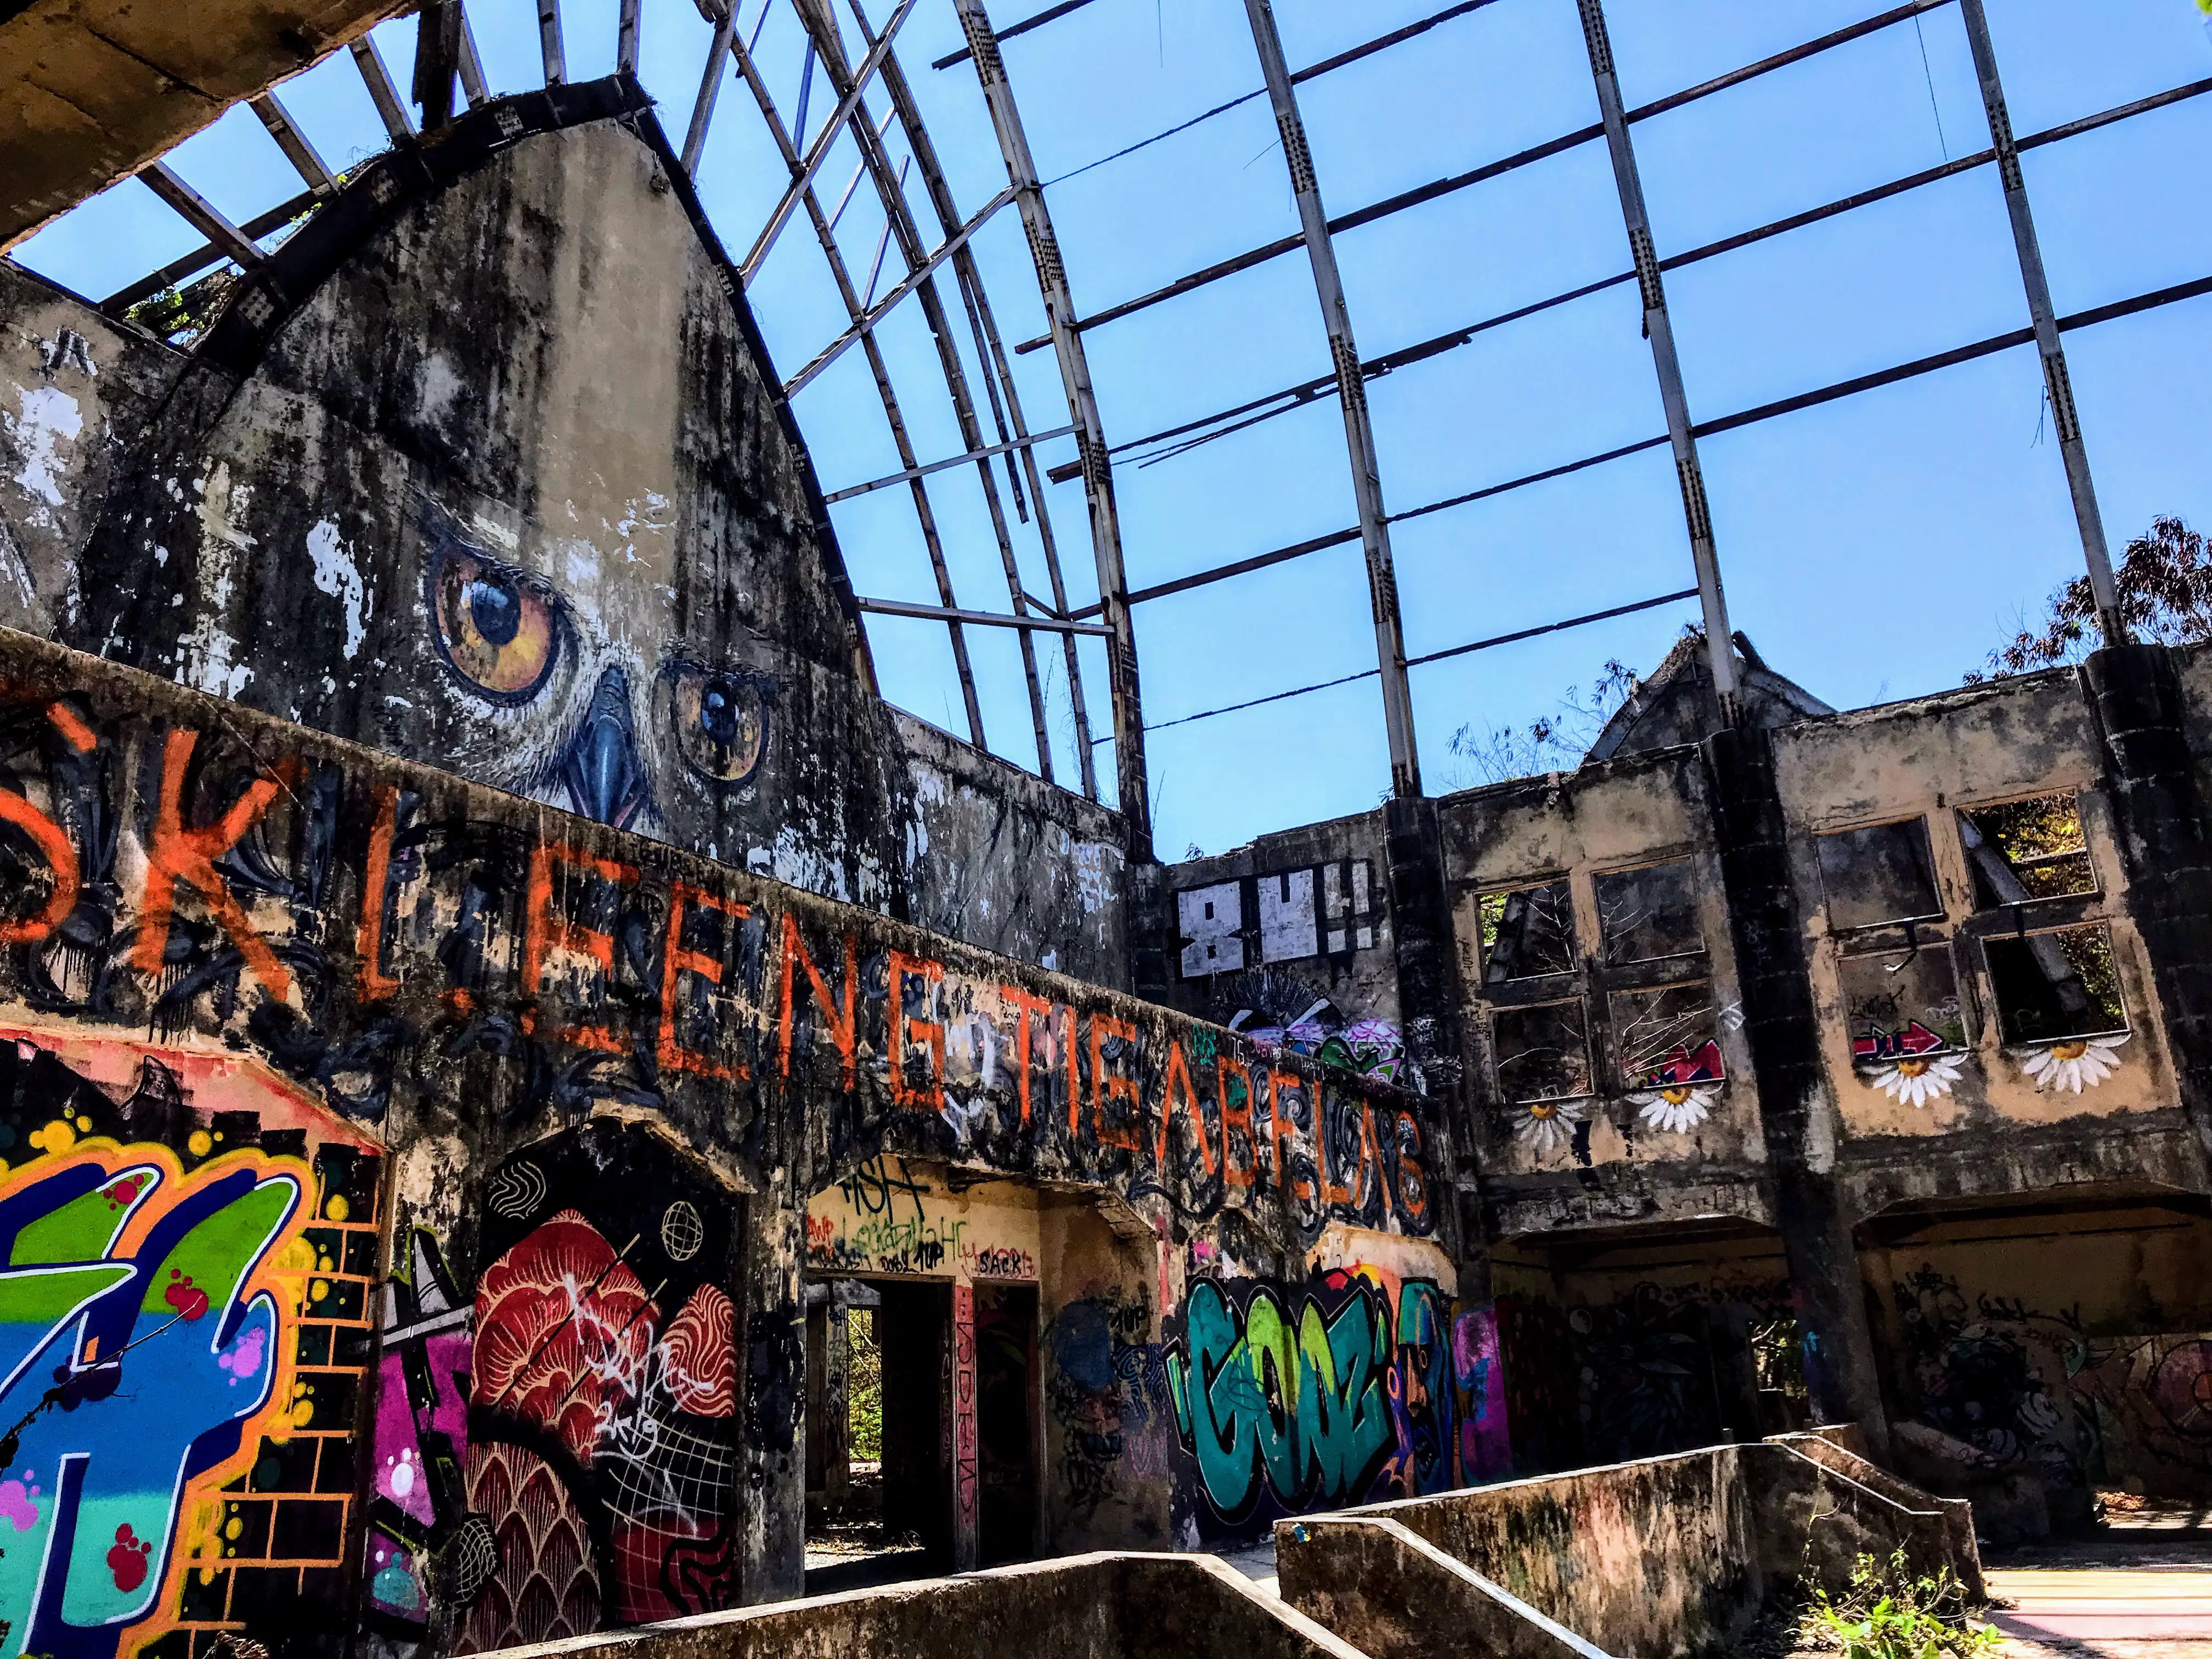 How to visit Bali’s abandoned theme park (without a bribe)